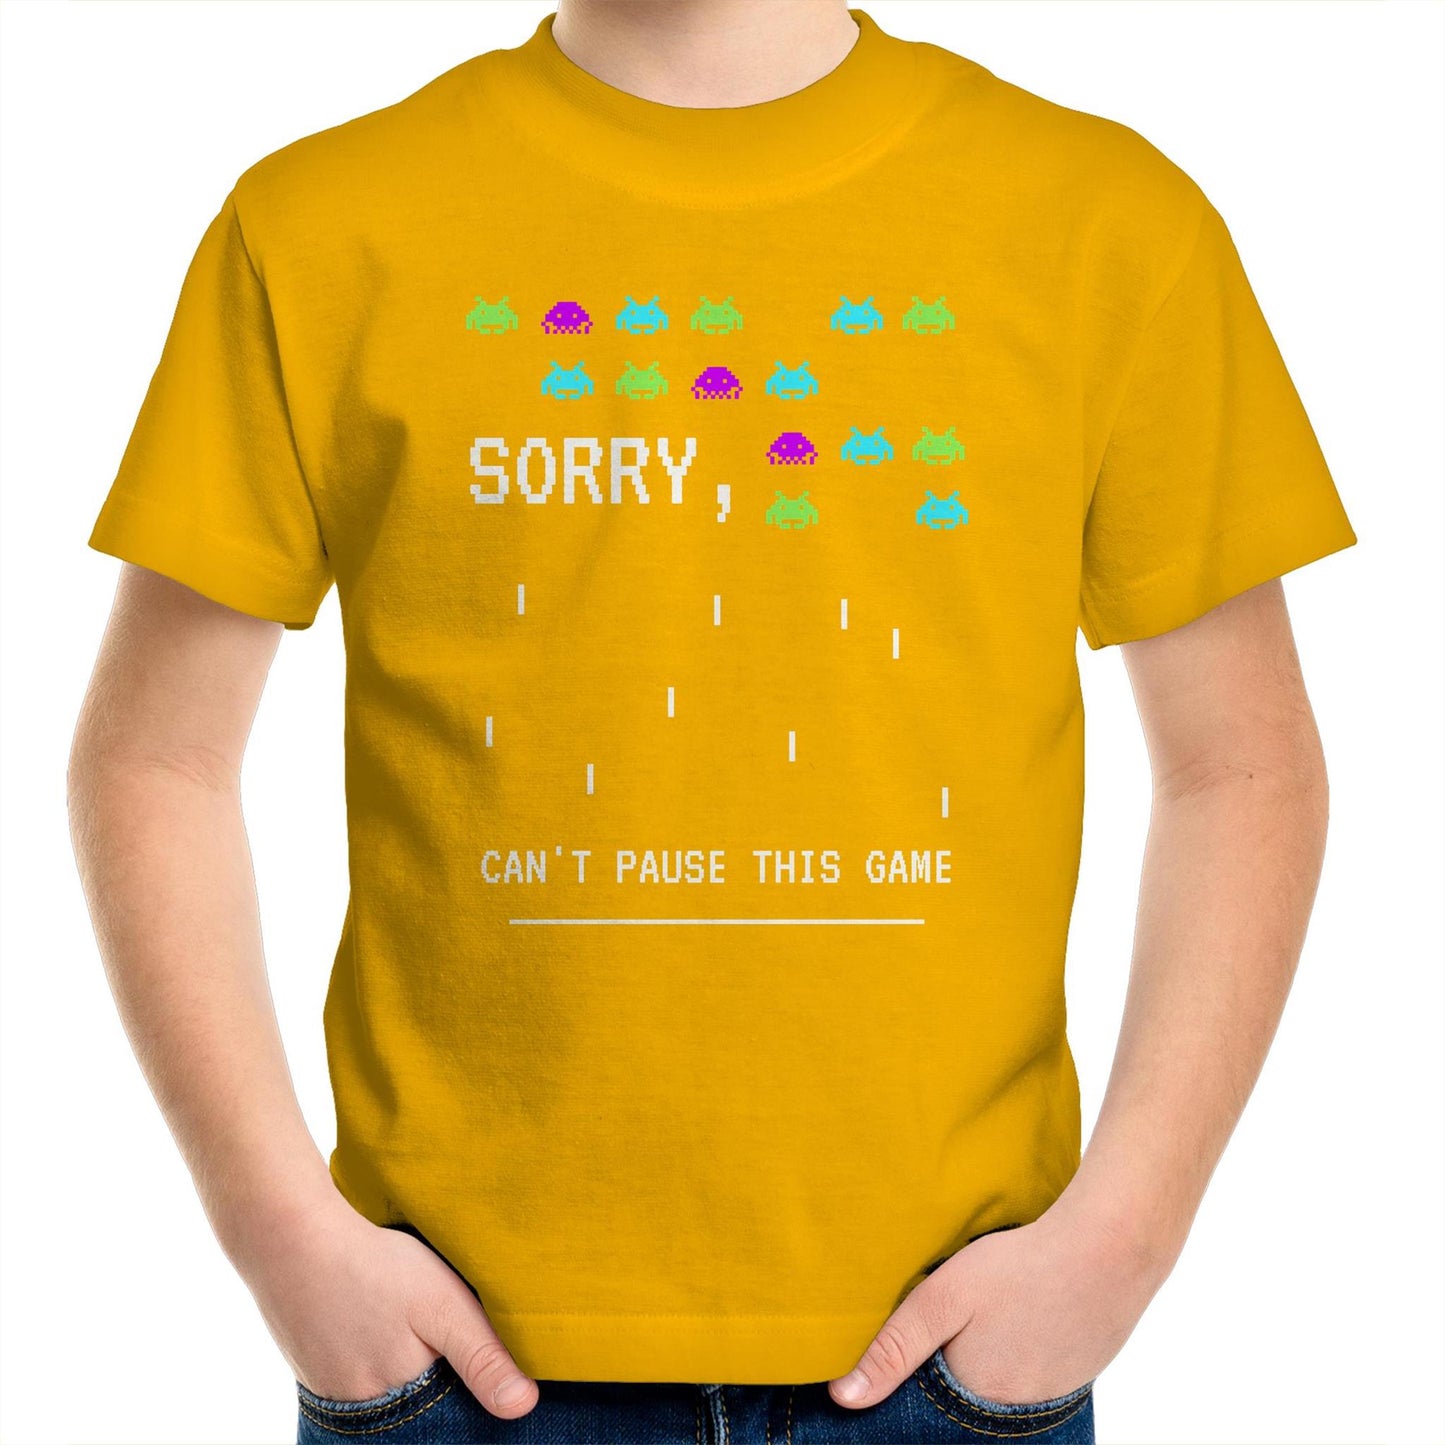 Sorry, Can't Pause This Game - Kids Youth Crew T-Shirt Gold Kids Youth T-shirt Games